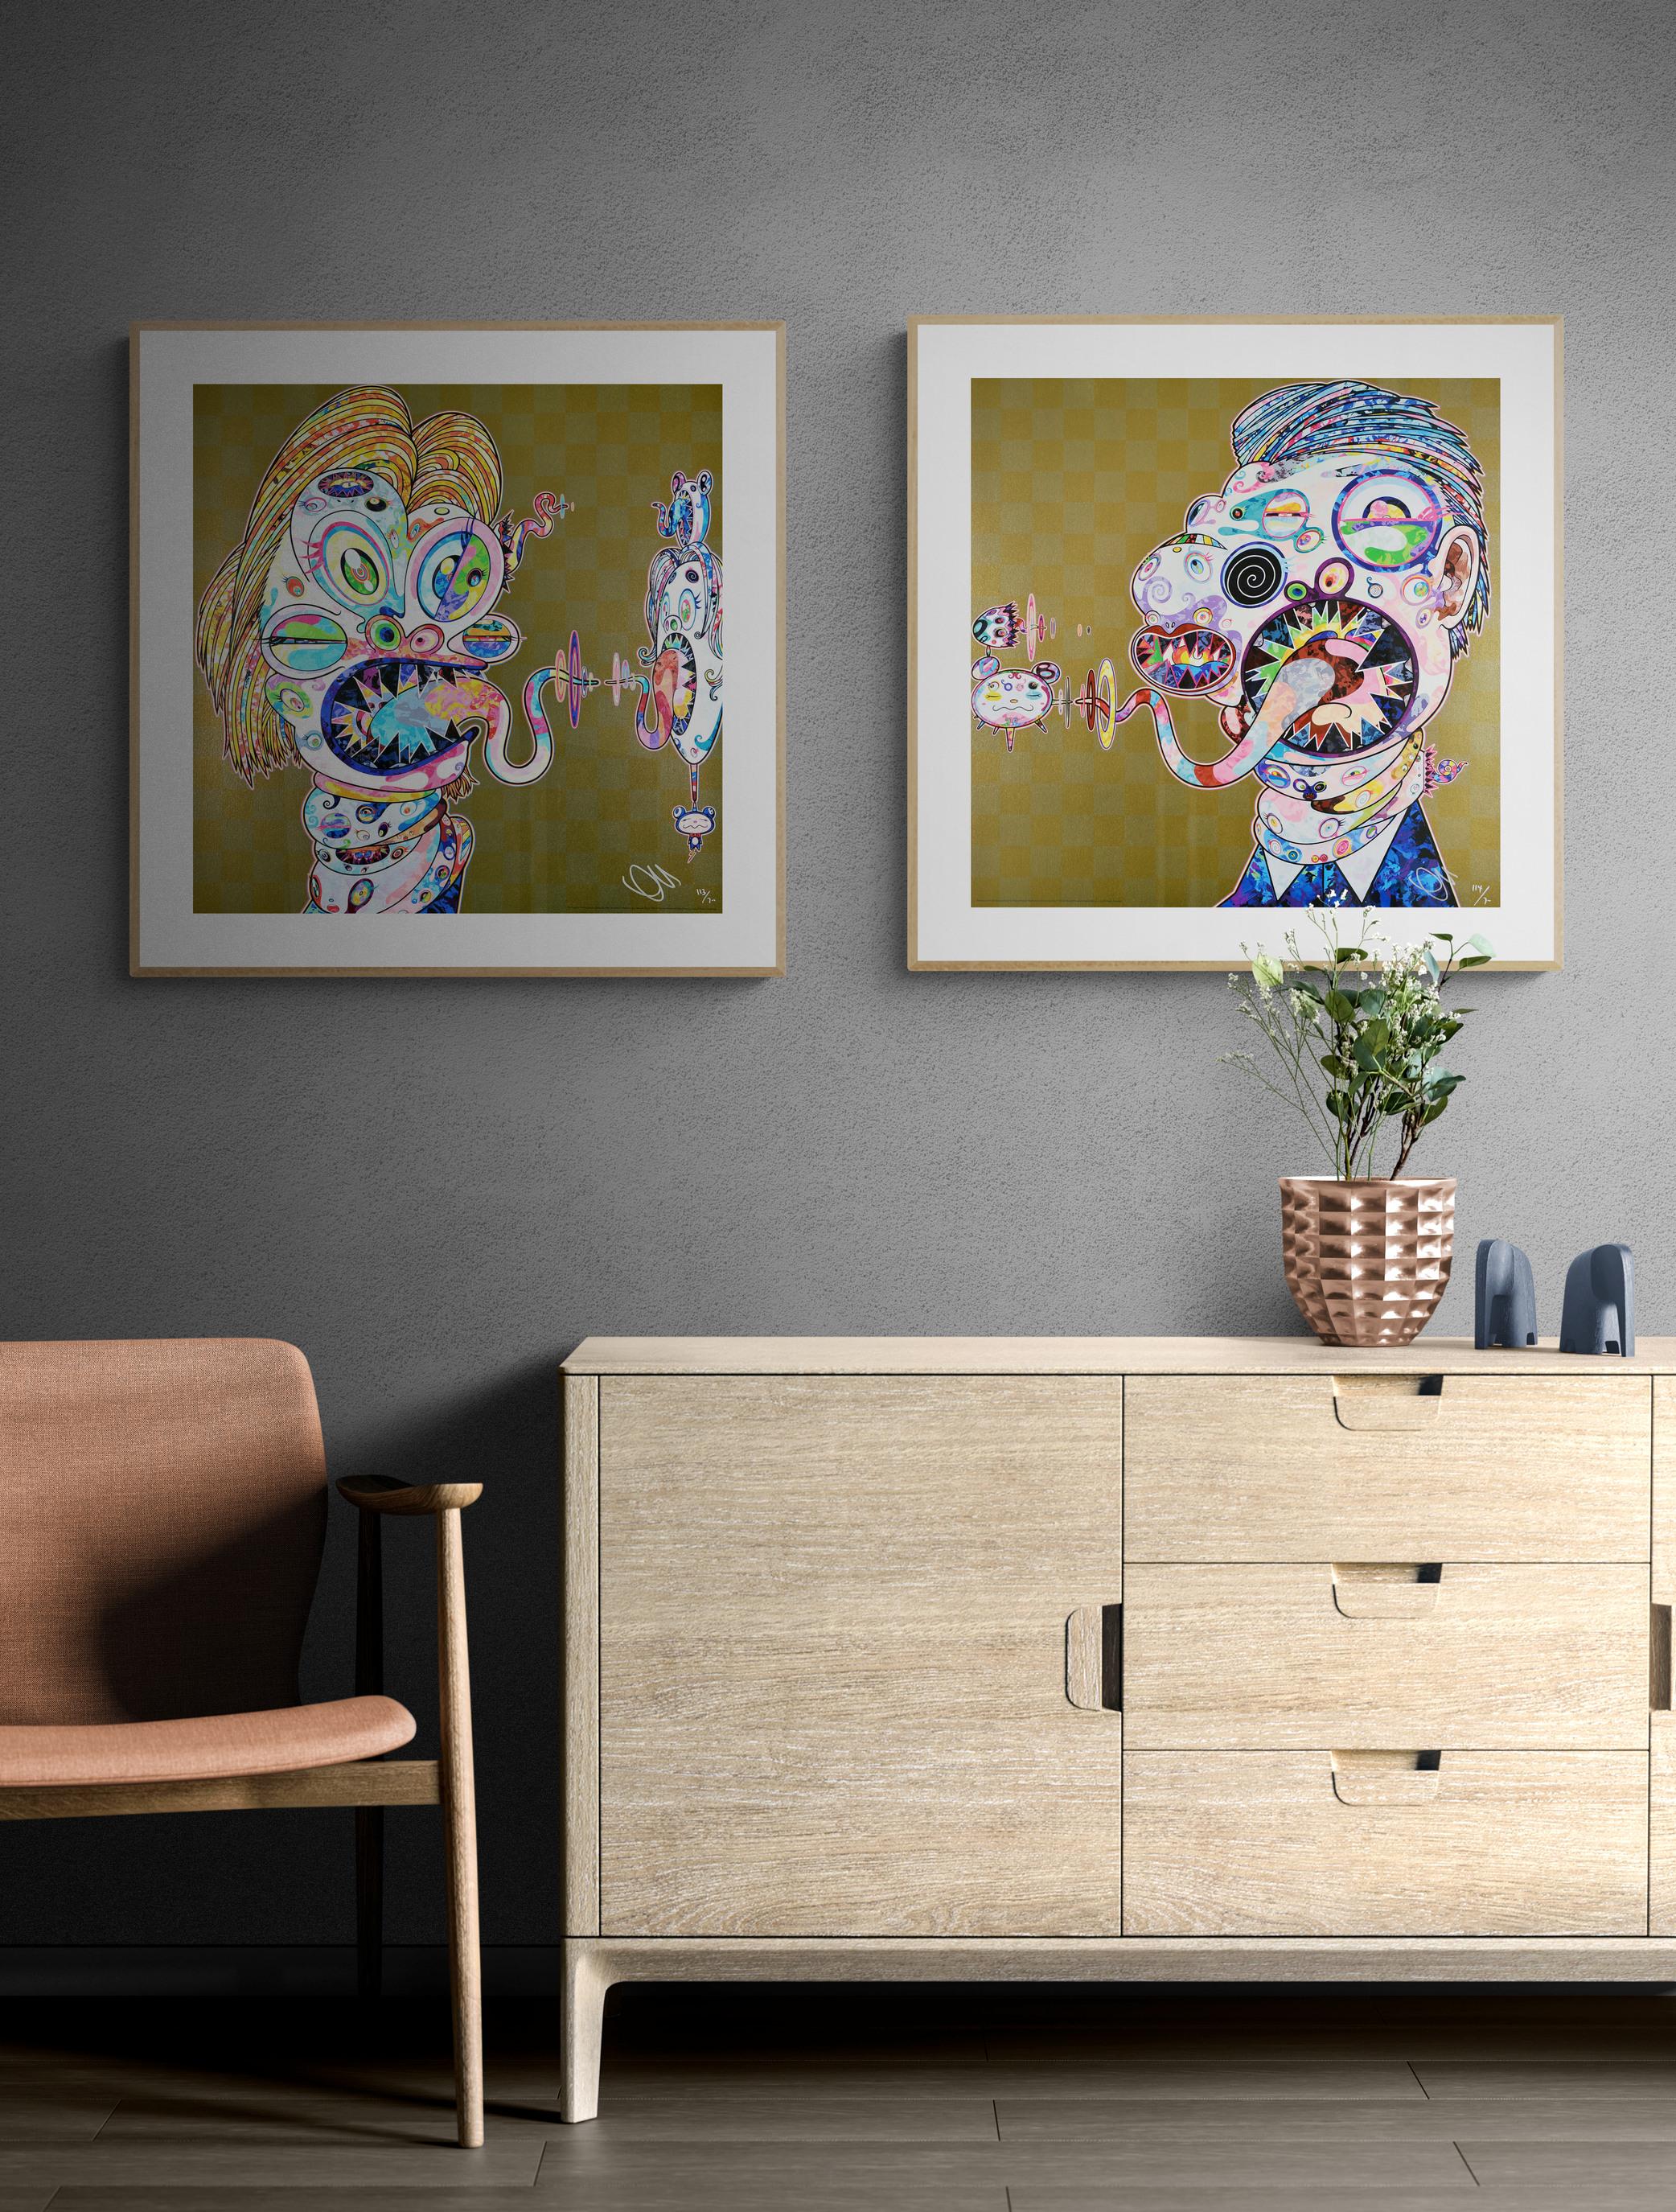 HOMAGE TO FRANCIS BACON DIPTYCH Superflat, Pop Art, Gold, Colors, Japanese 4